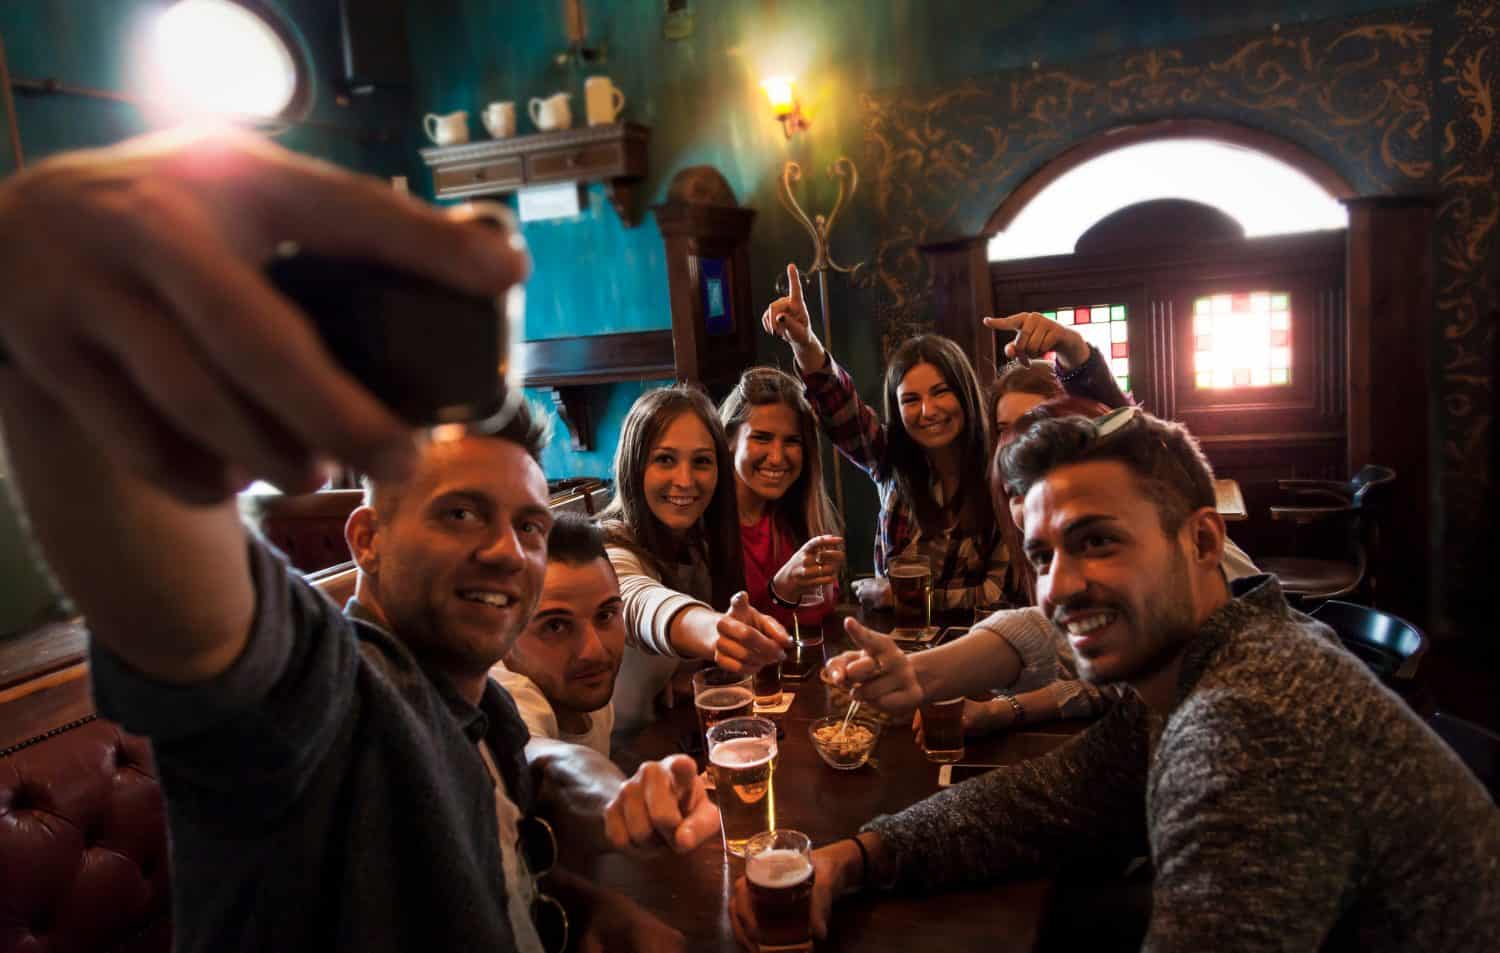 group of millennial people takes a selfie in a pub drinking beer and eating snacks